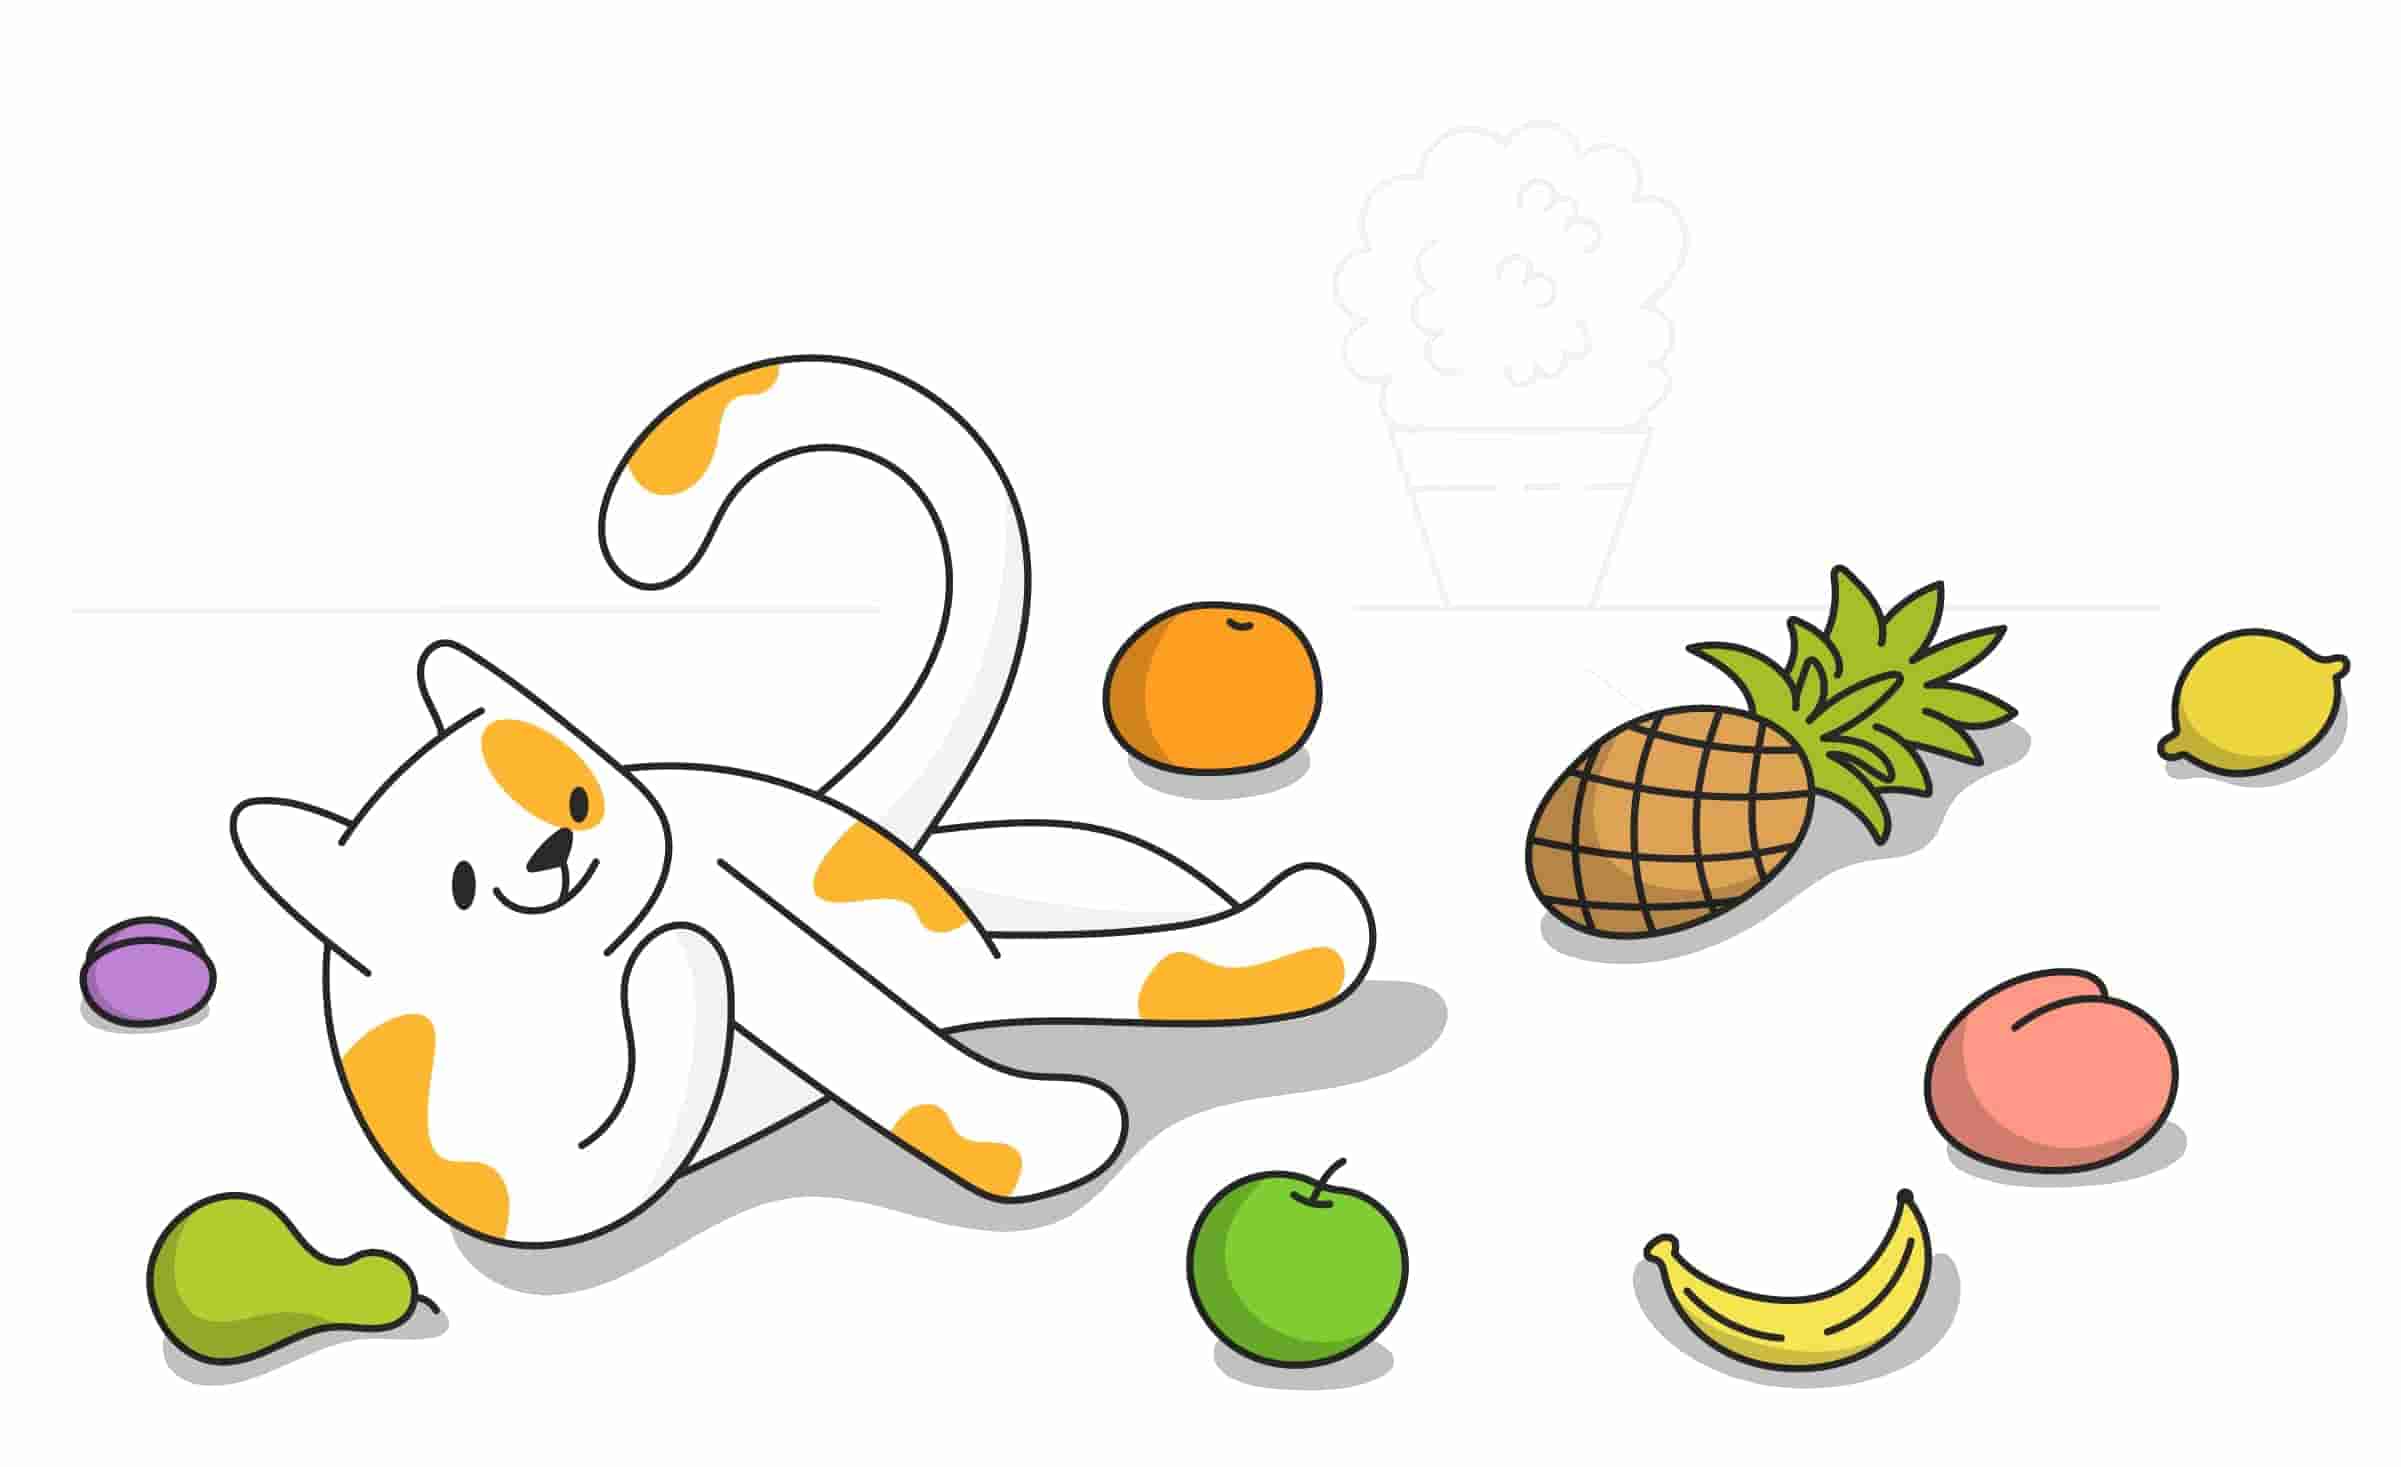 Can Cats Eat Fruits Like Apples, Bananas, or Grapes?